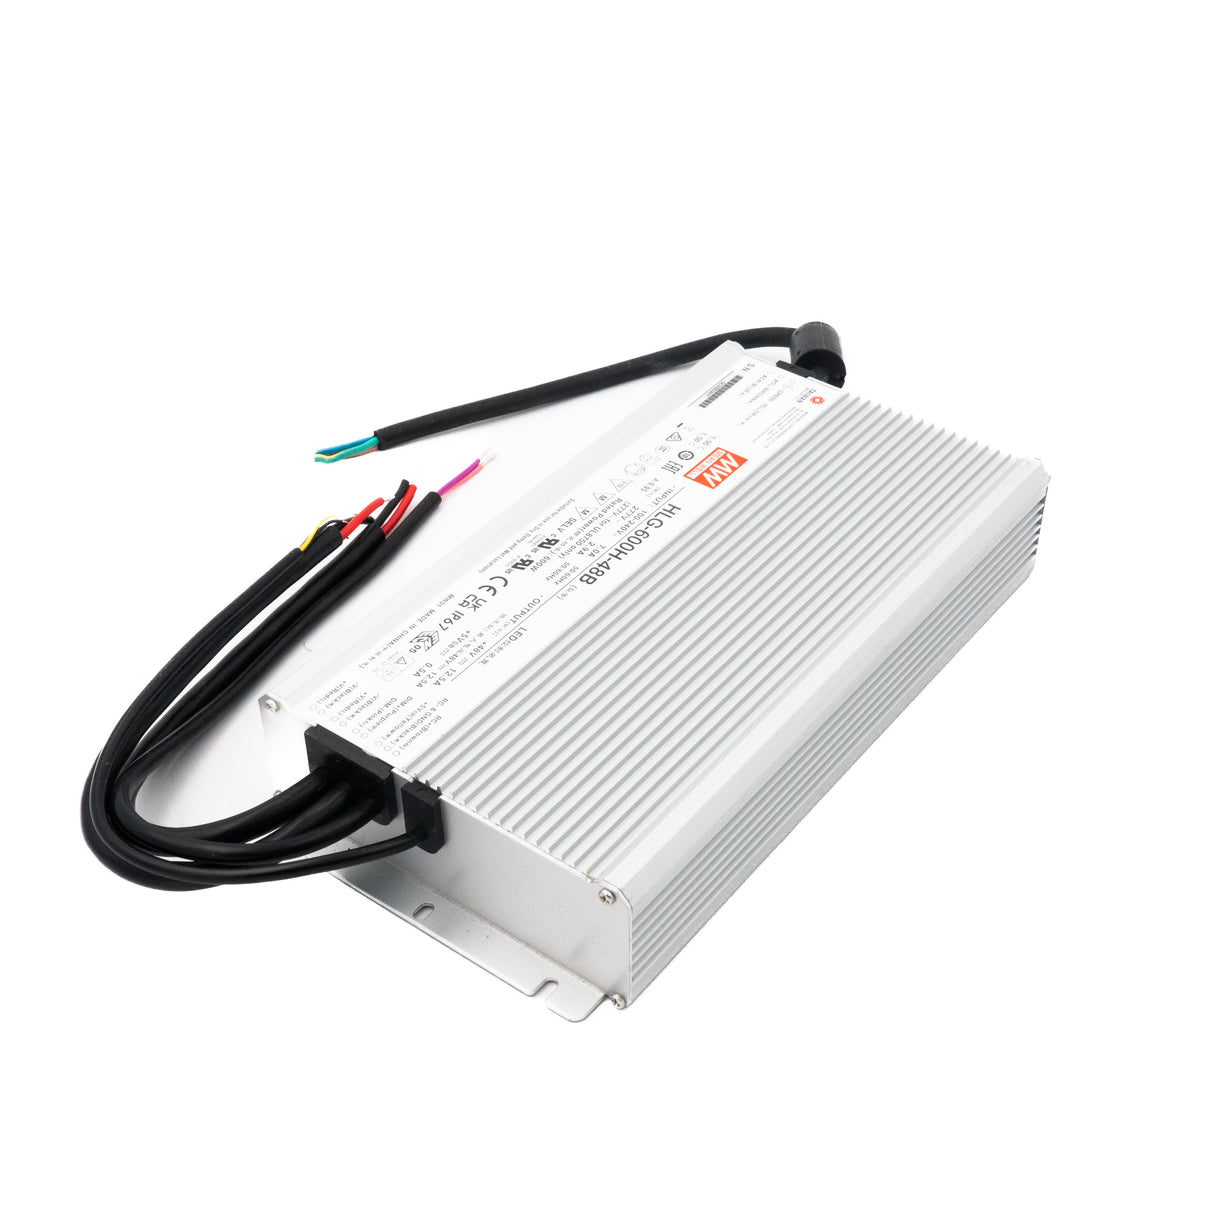 Mean Well HLG-600H-48B Power Supply 600W 48V- Dimmable - PHOTO 2